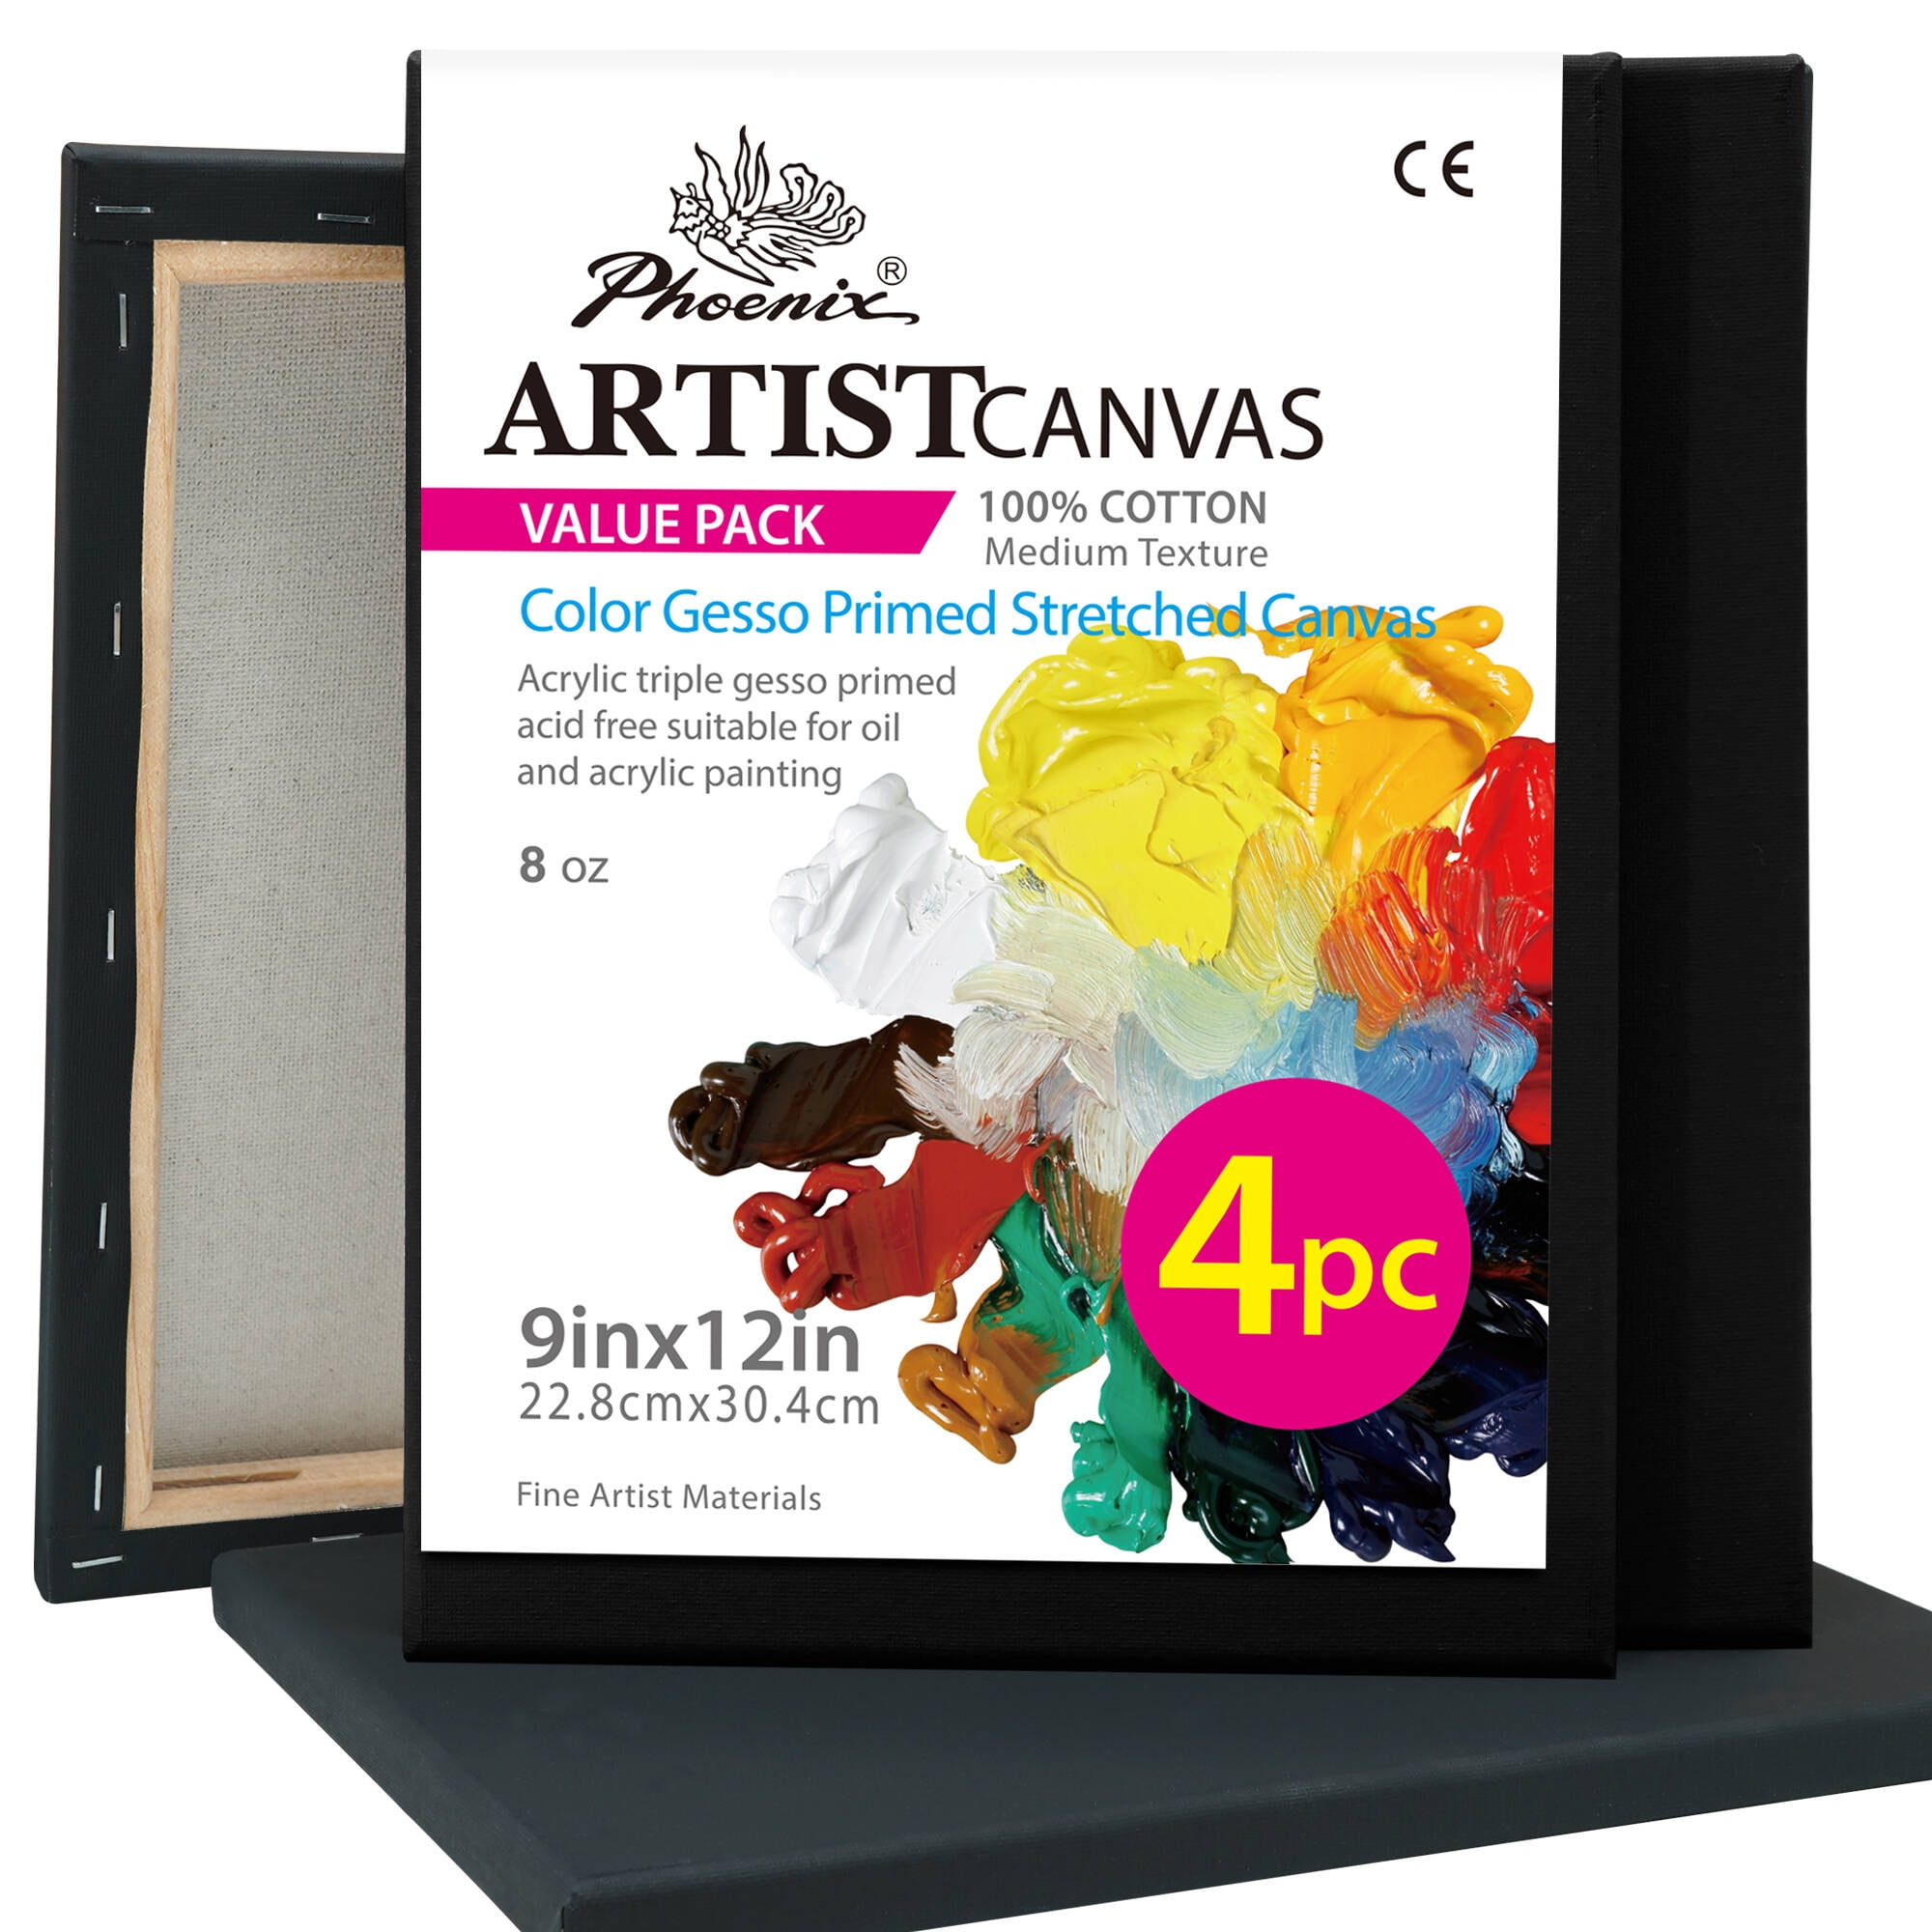 4pcs Black Stretched Canvas, 8x8 Inch (20x20 Cm) Paint Canvases For  Painting, 8 Oz Quadruple Gesso Primed 100% Cotton Blank Black Canvases For  Acrylic